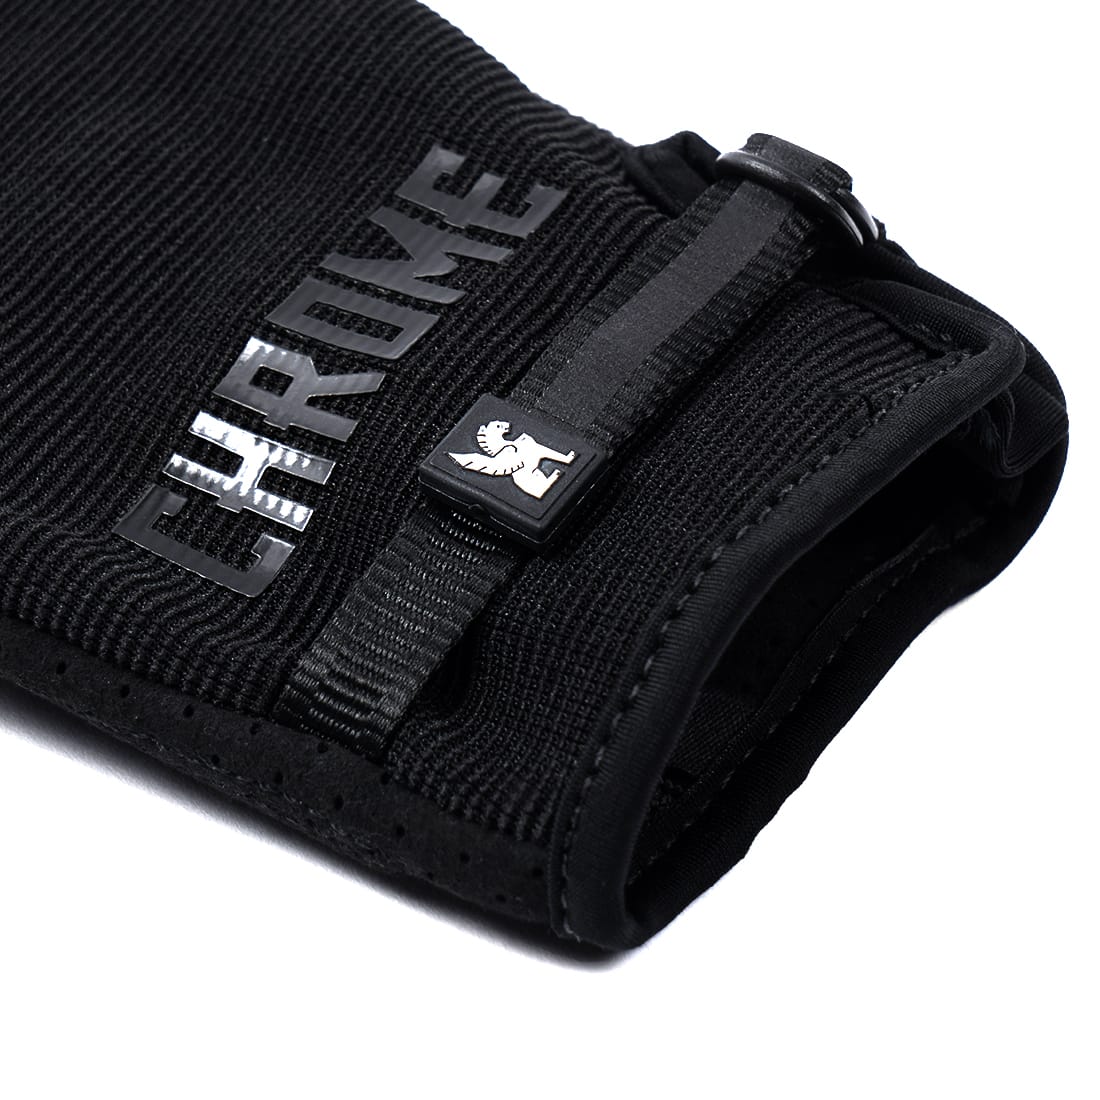 Chrome Cycling Gloves in black wrist strap detail #color_black